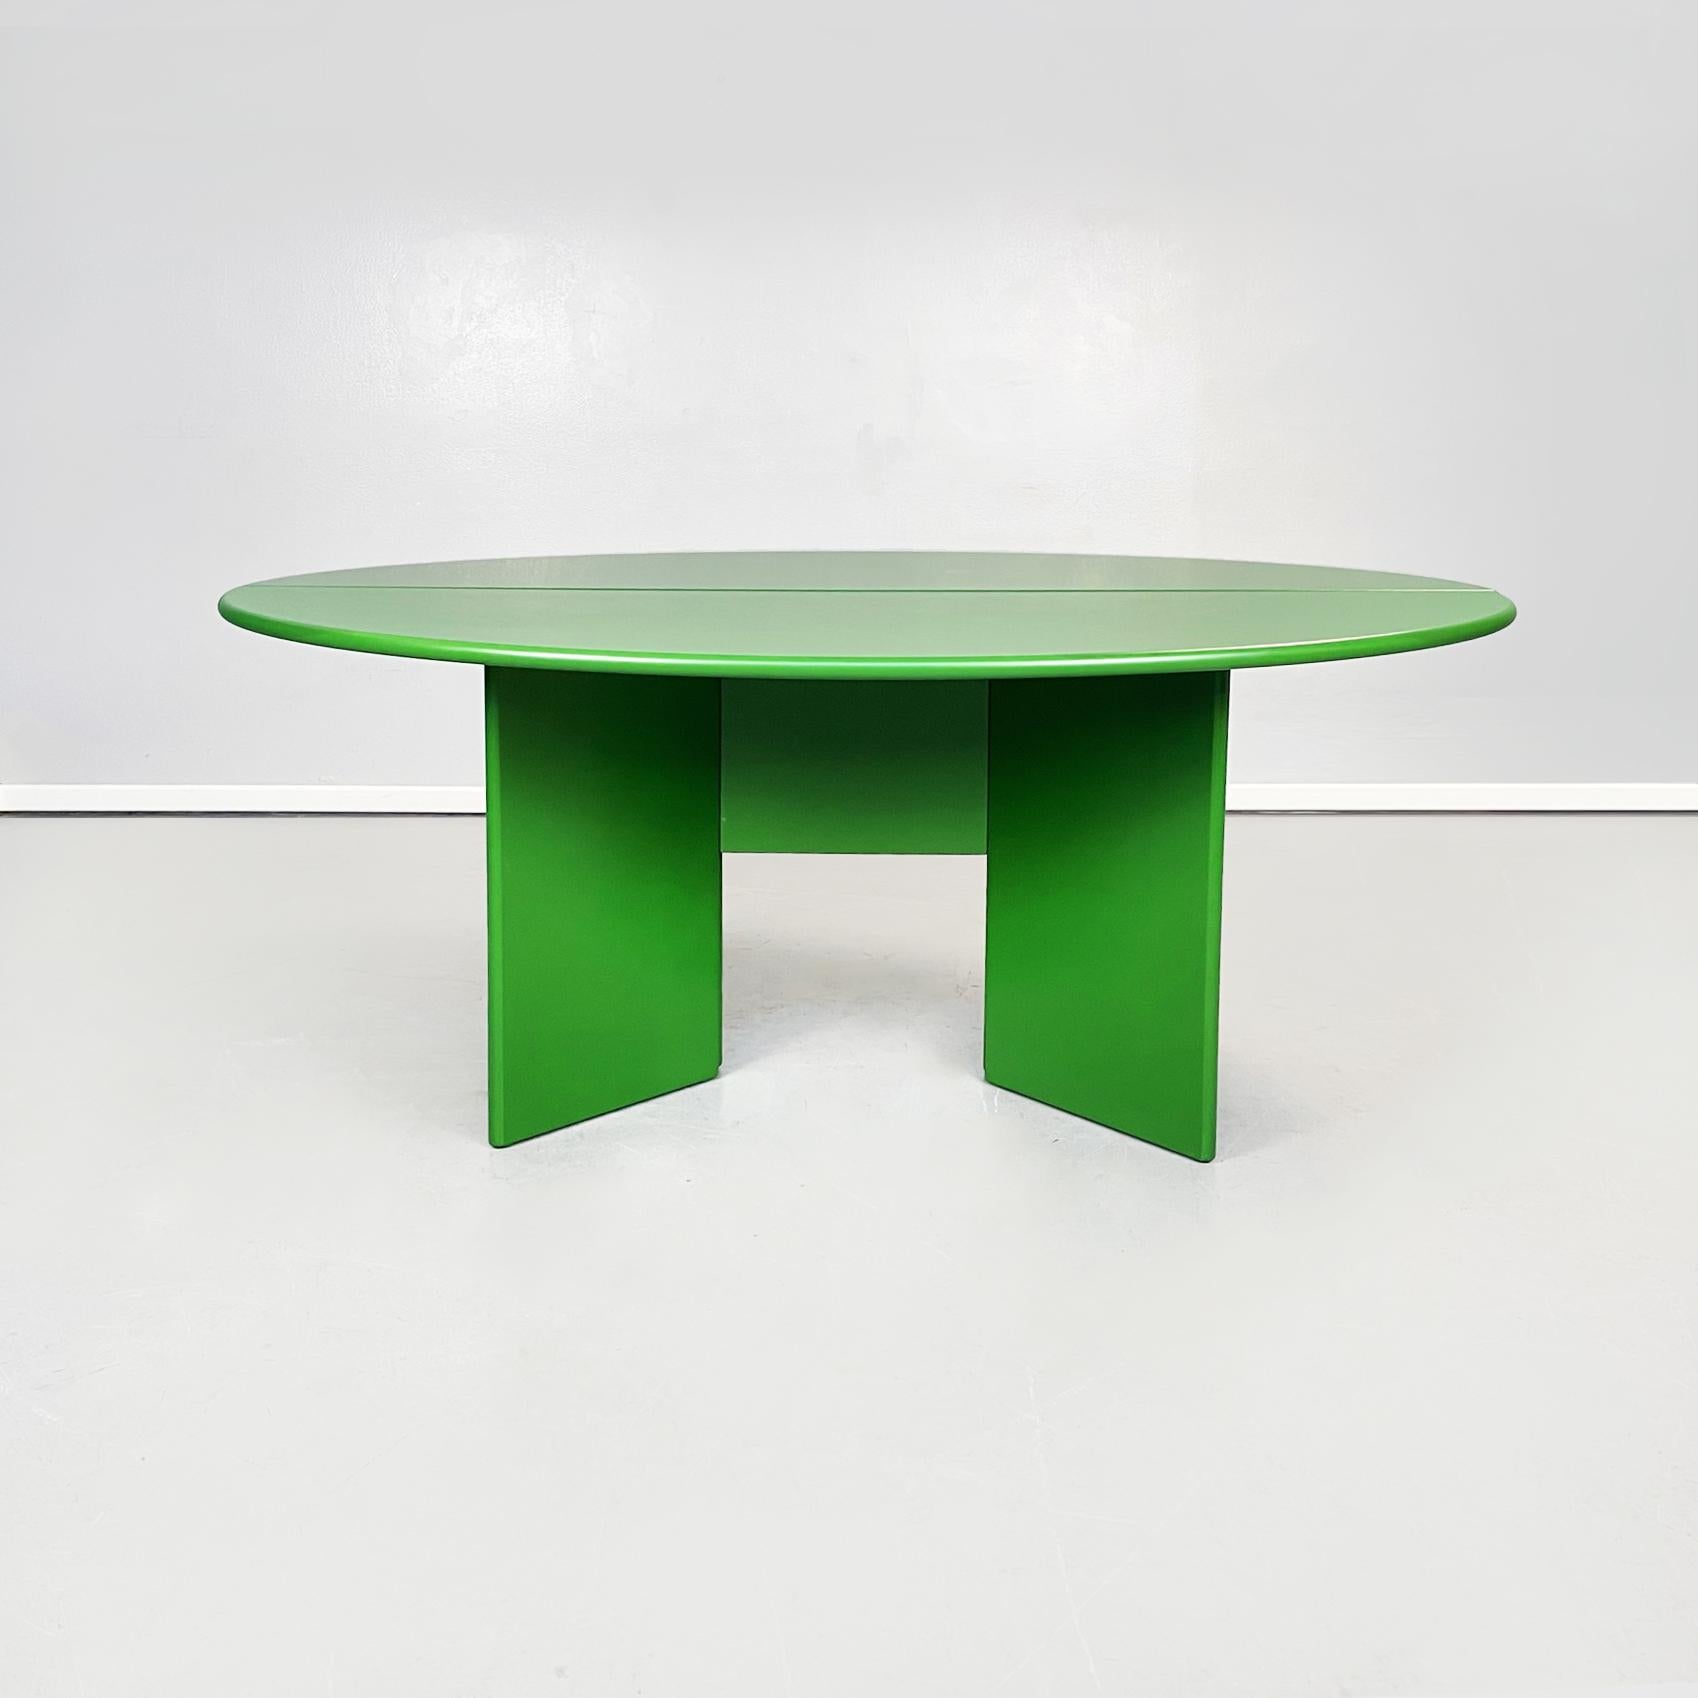 Italian modern wooden green table Antella by Takahama for Cassina, 1980s
Table mod. Antella with two semi-oval tops in green lacquered wood. The two tops are joined in the center by magnets and hinges, which allow the top to be folded. The